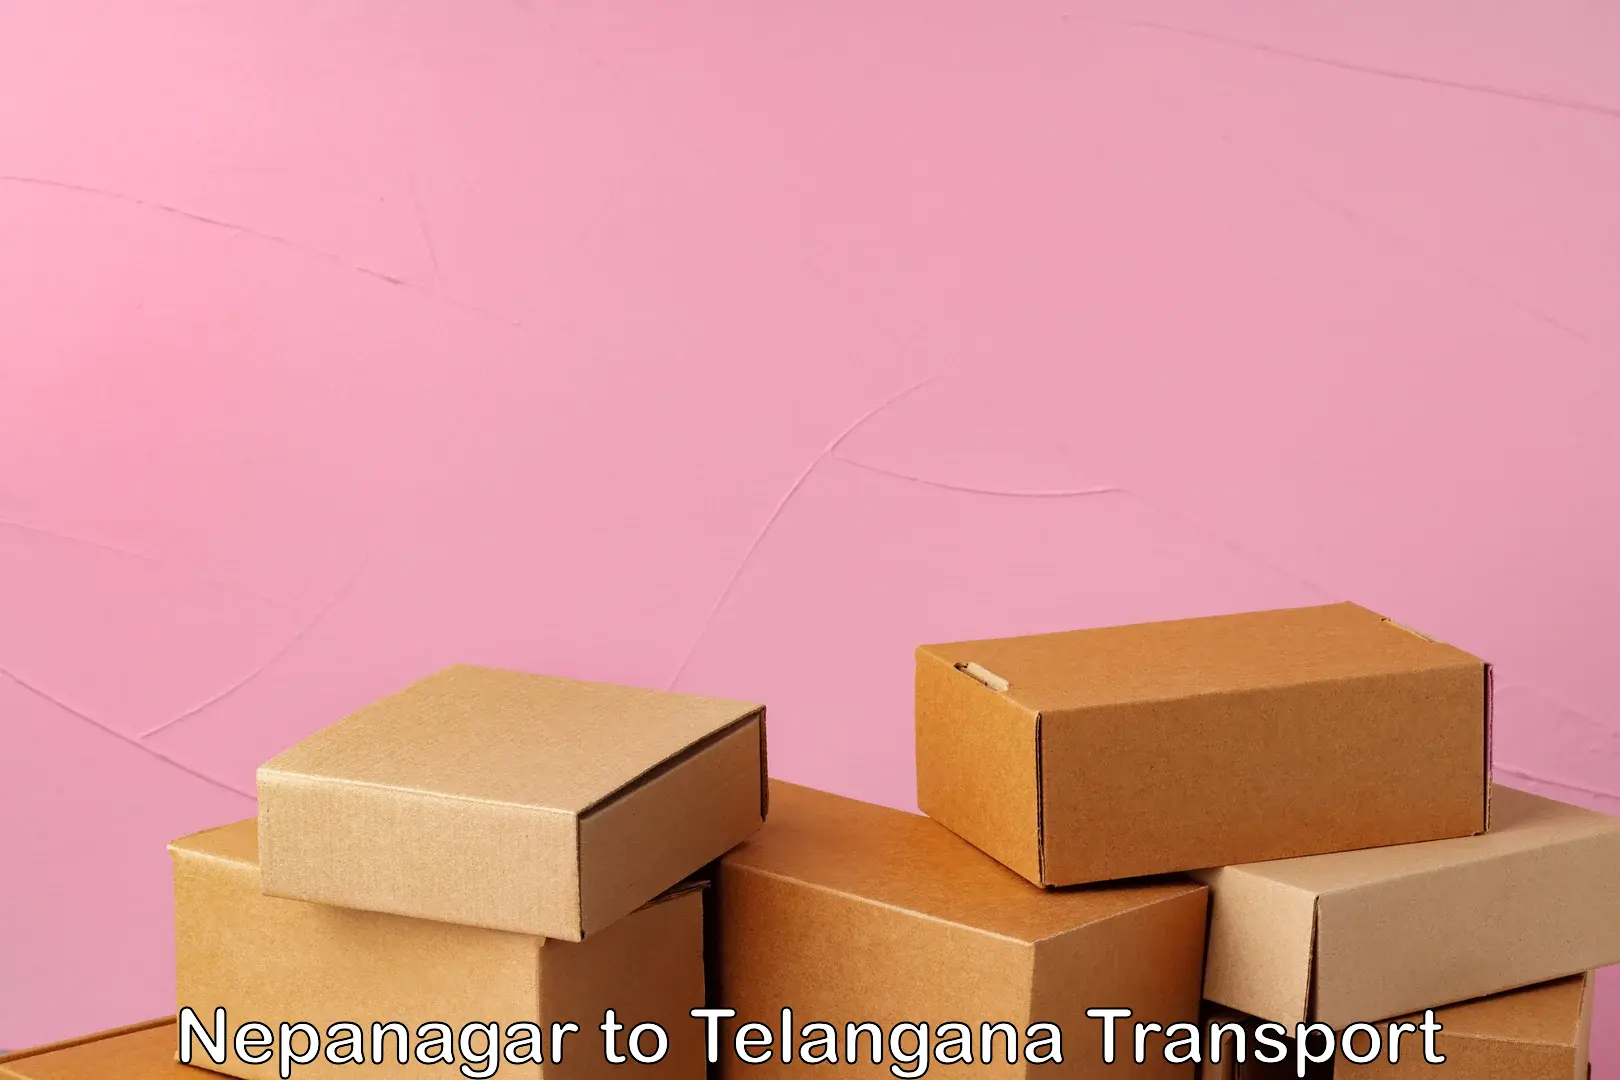 Container transport service Nepanagar to Jagtial